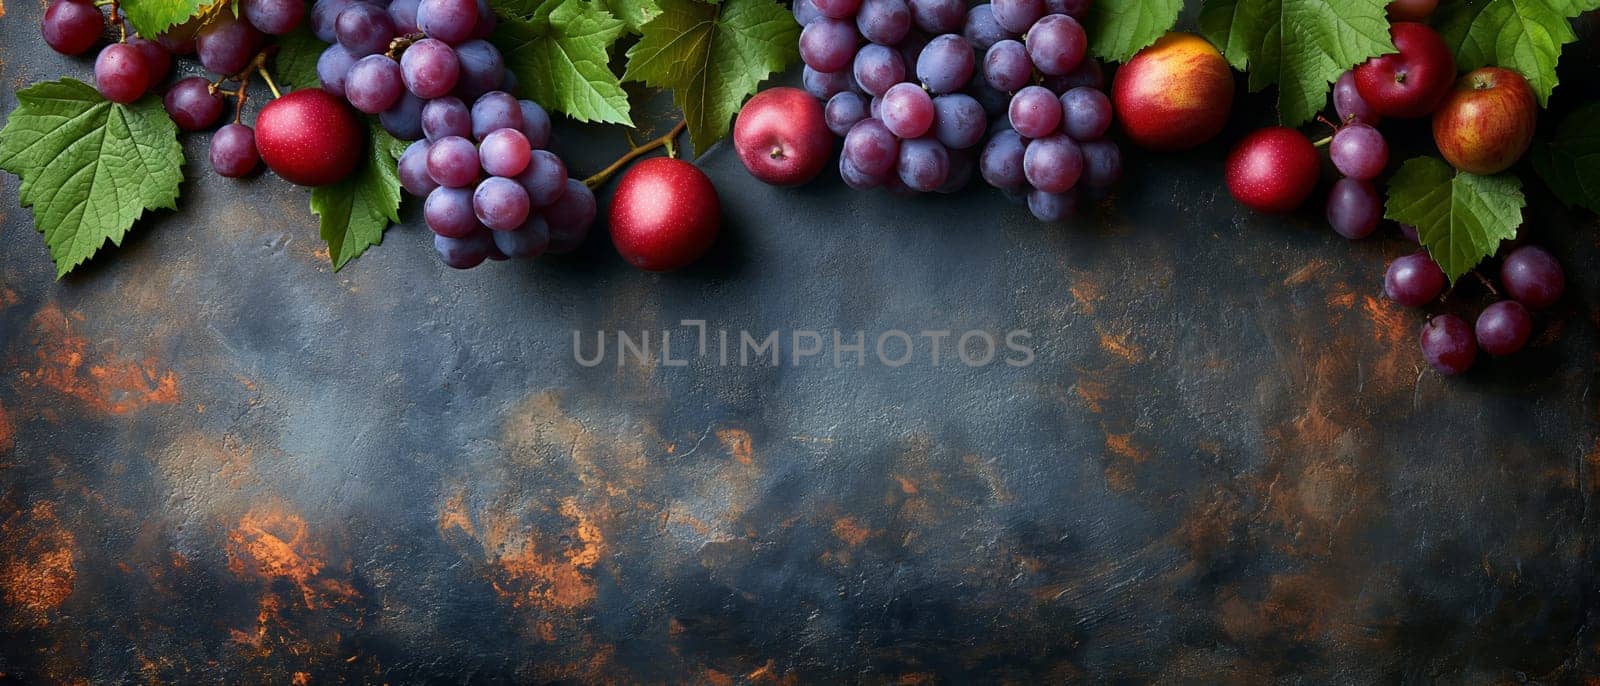 Grapes and leaves on a dark background. by Fischeron